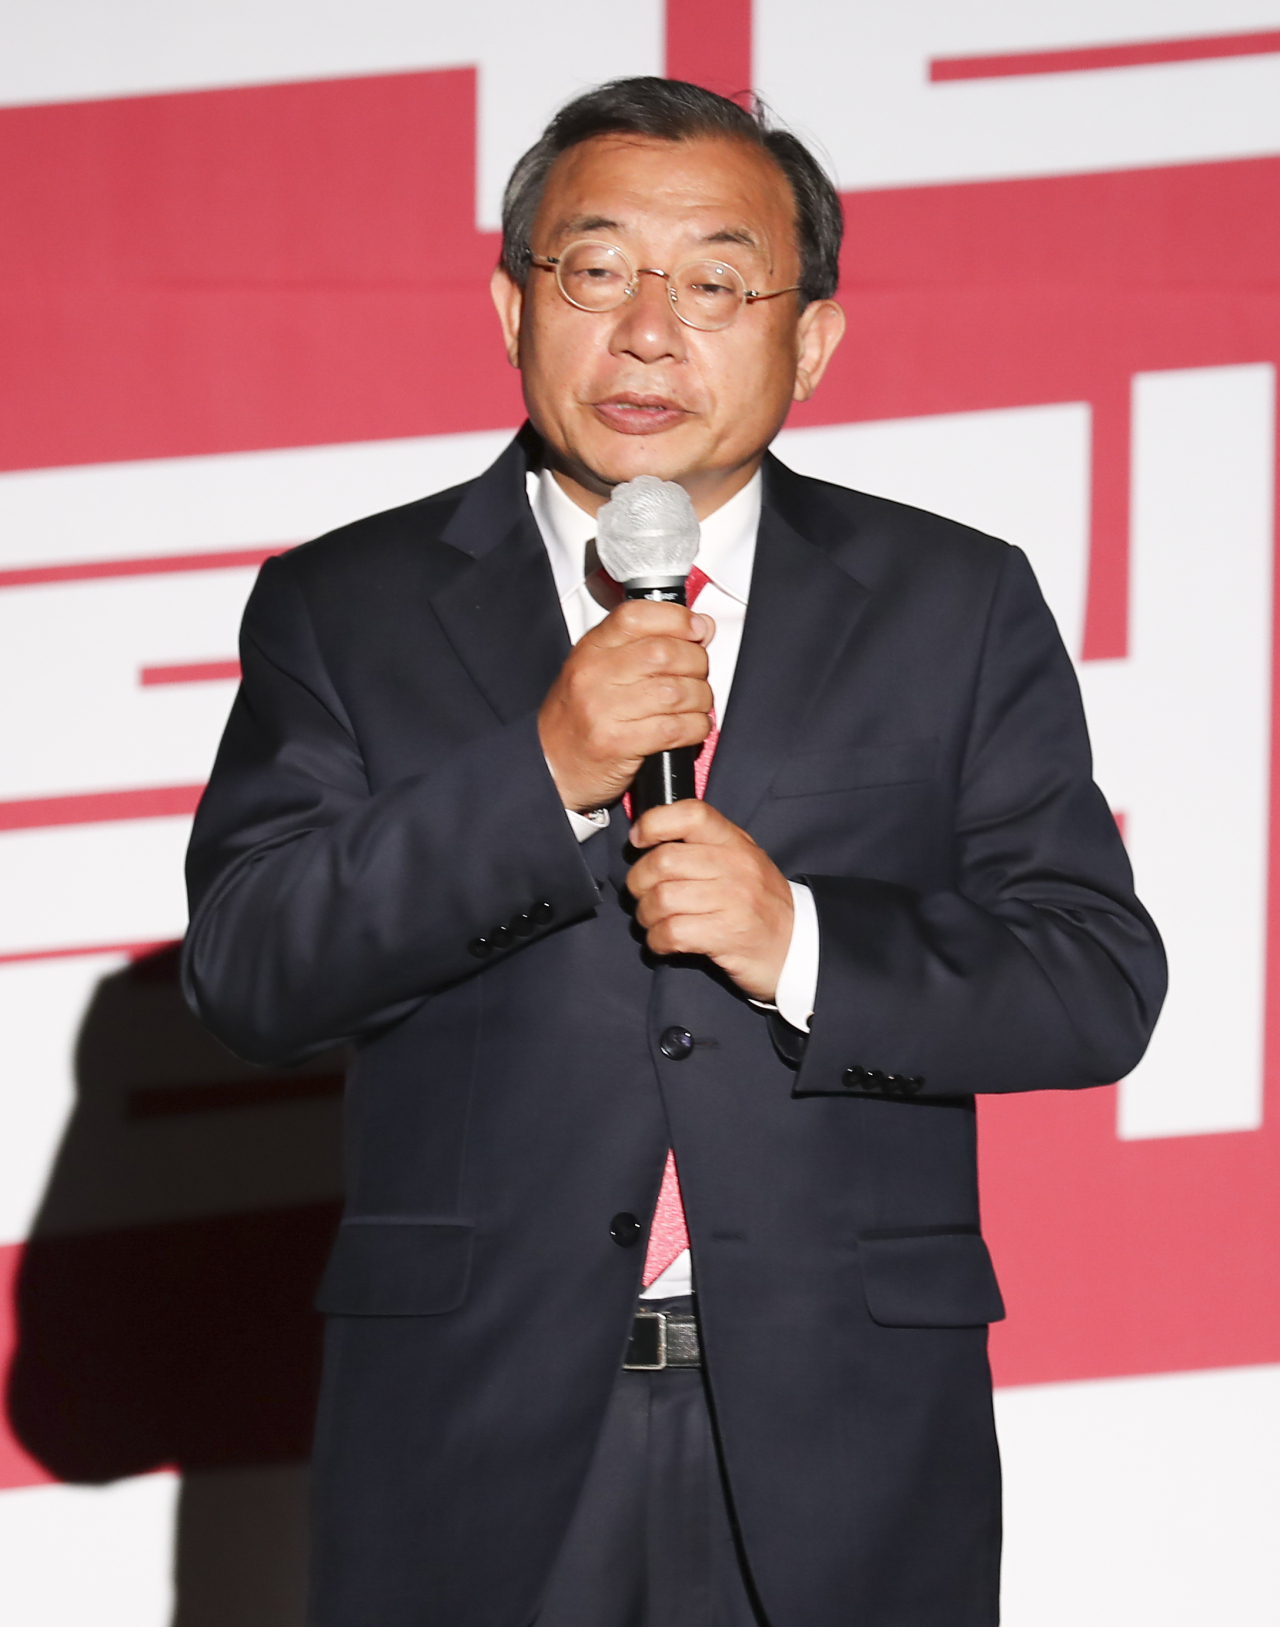 Candidate Lee Jung-hyun running for governor of South Jeolla Province speaks at an event held by People Power Party at the National Assembly in Yeouido, western Seoul, on May 6. (Yonhap)